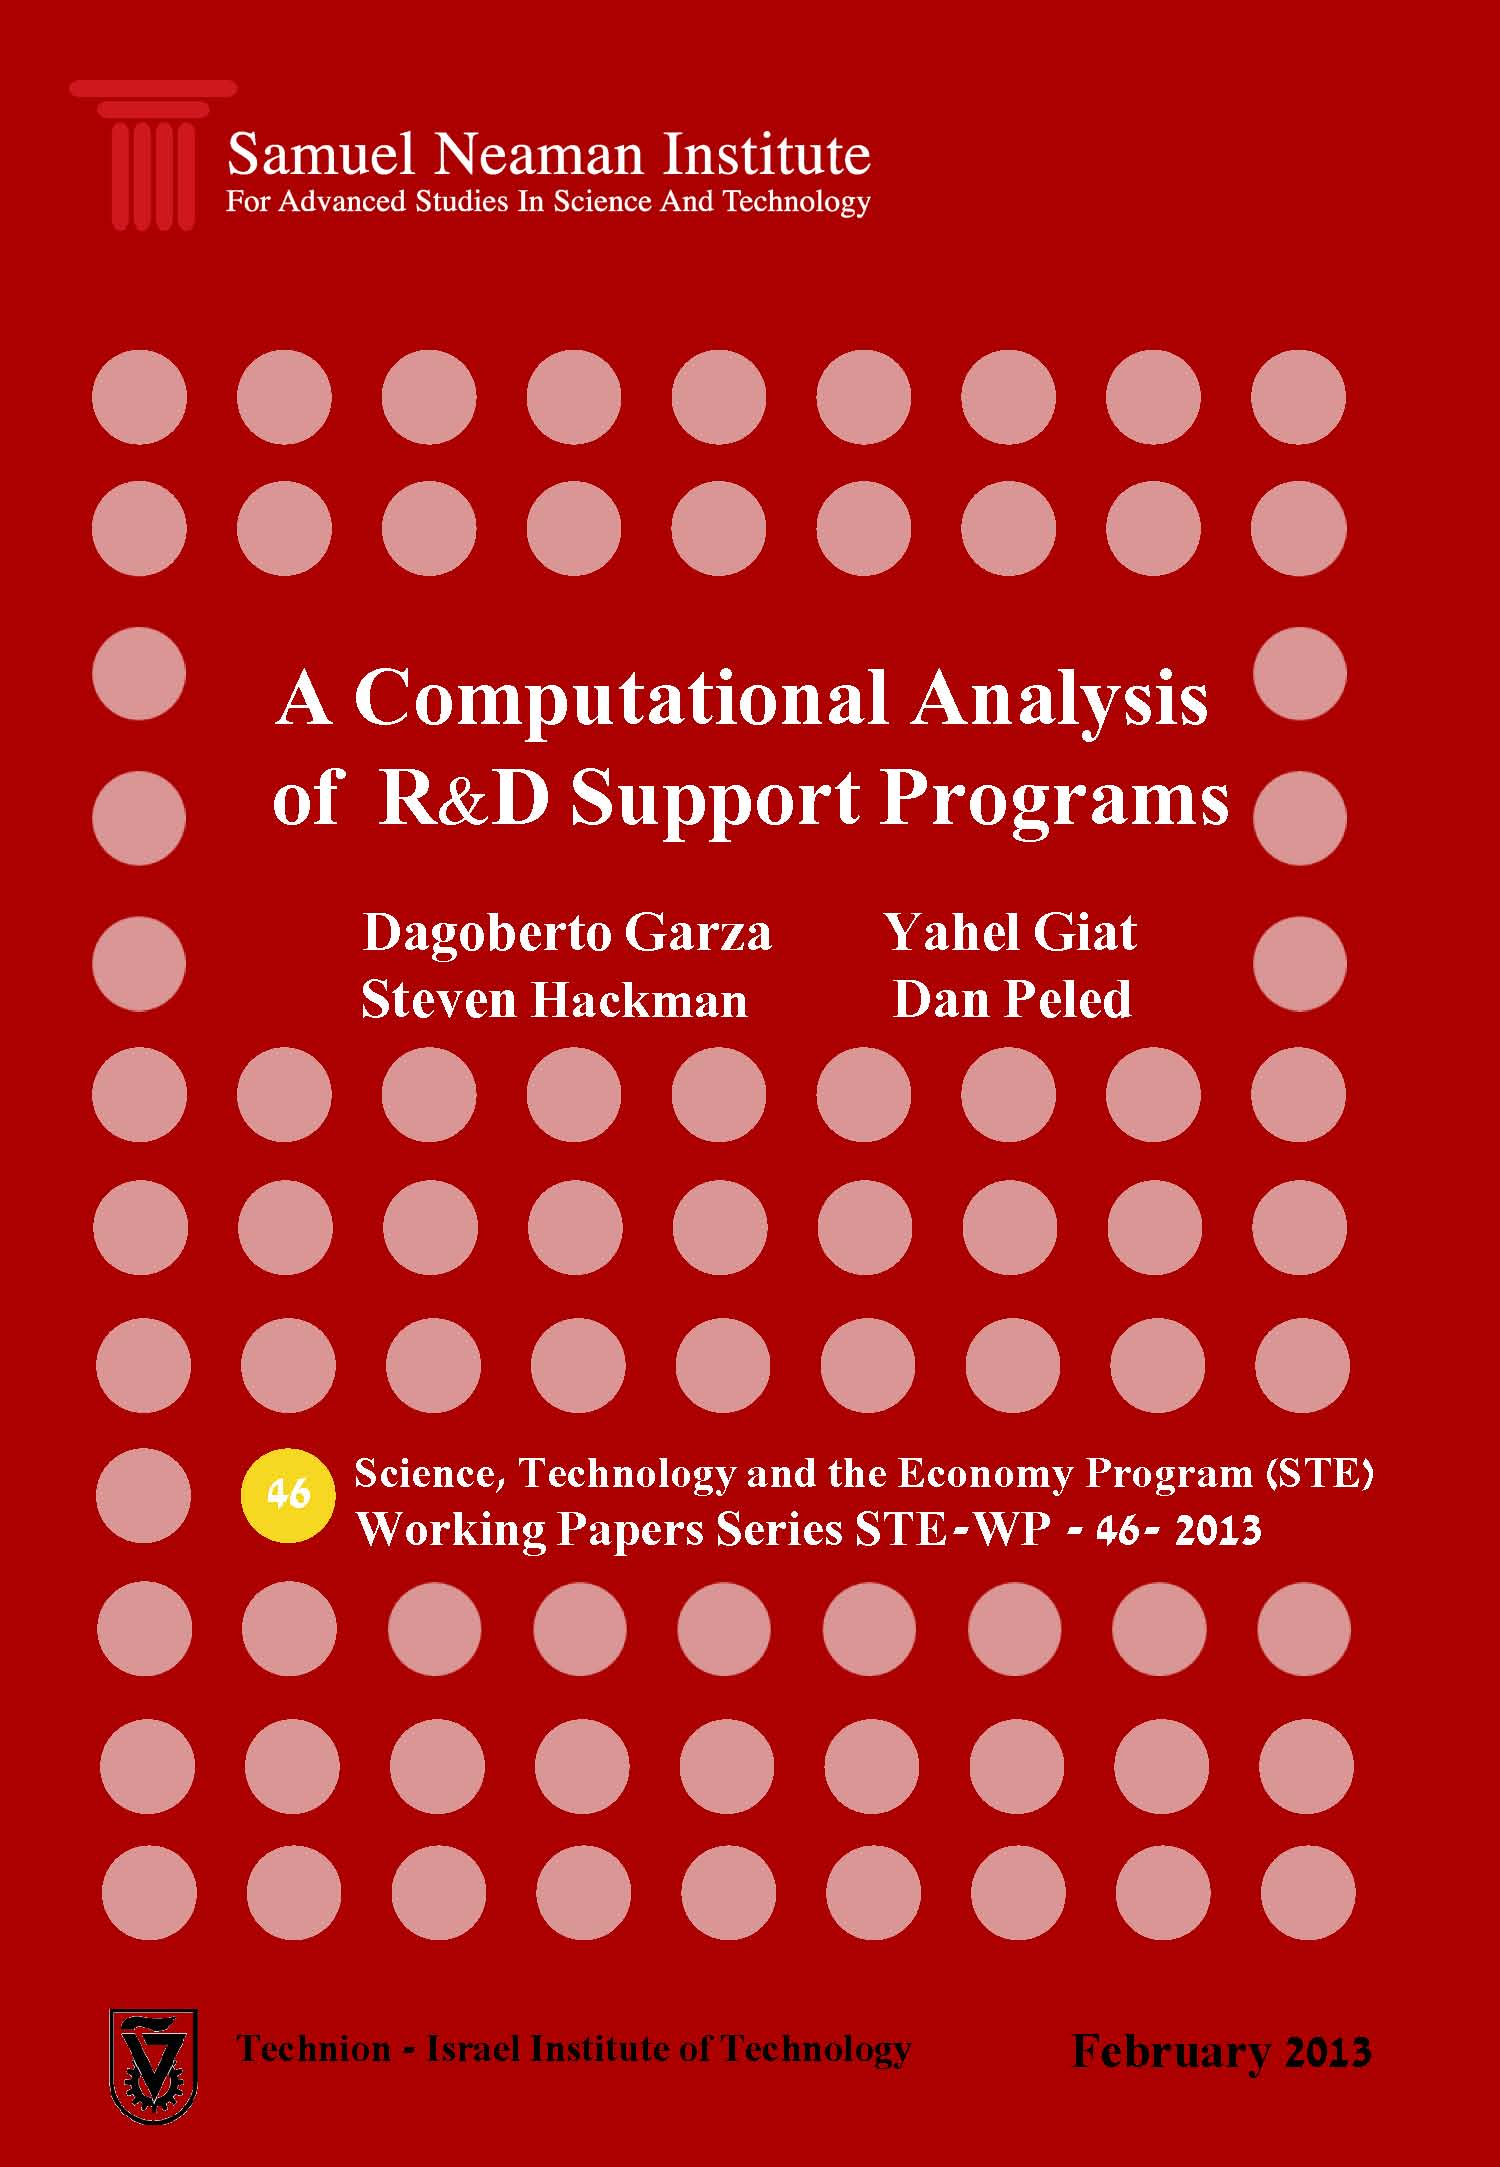 A Computational Analysis of R&D Support Programs